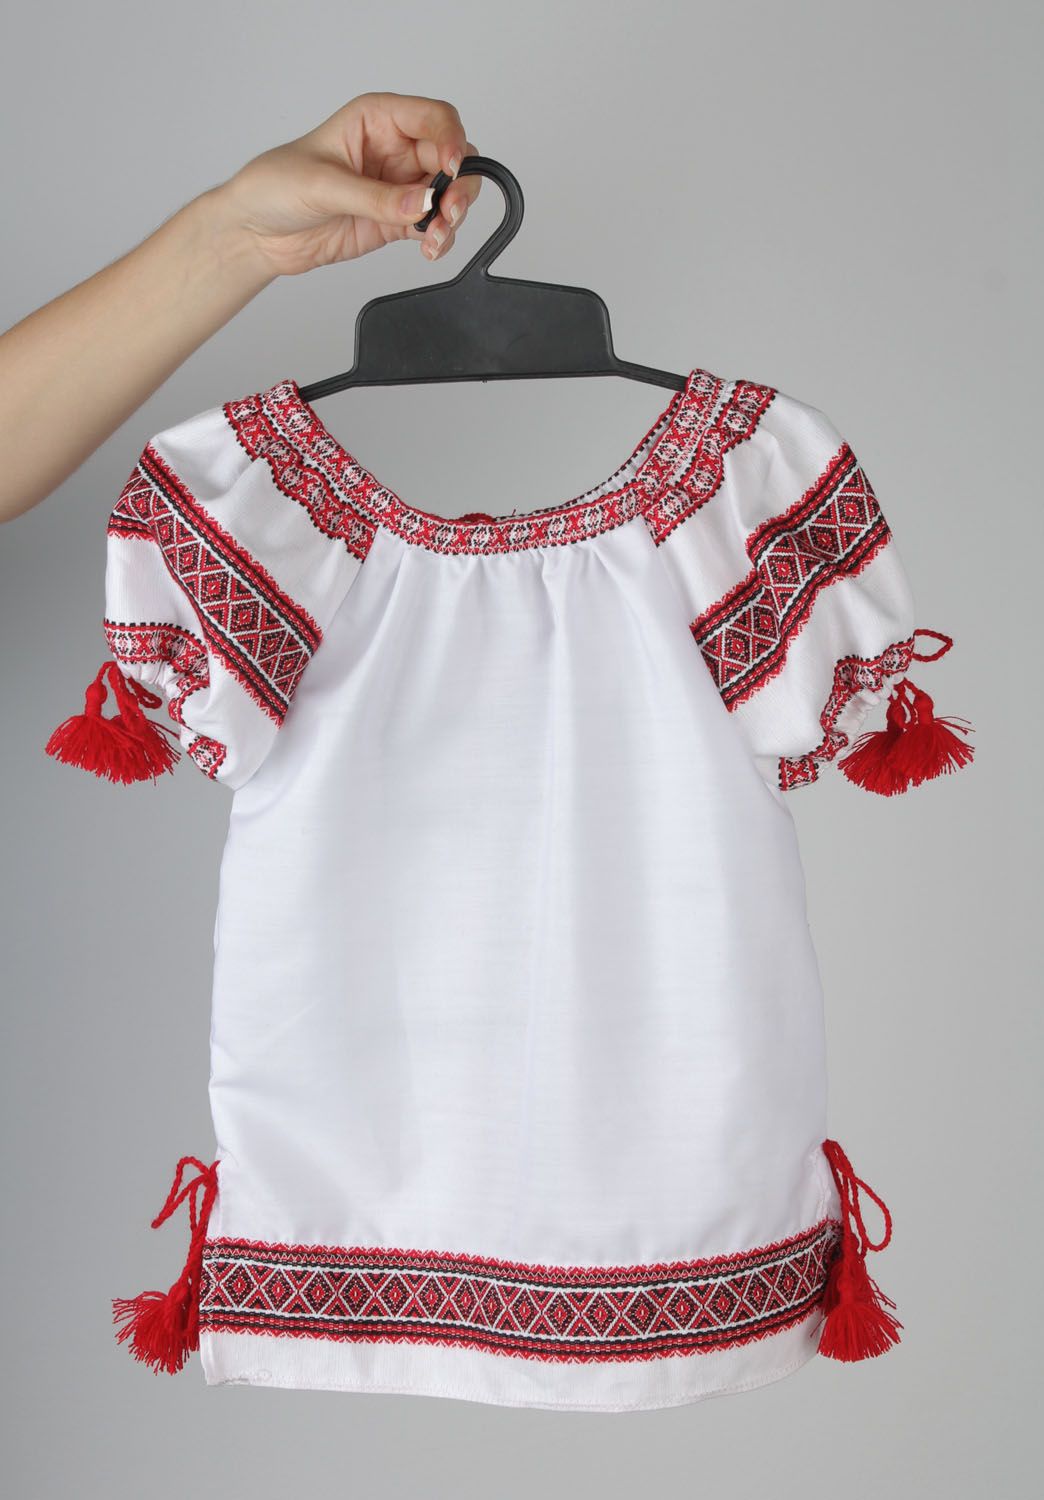 Embroidered baby dress photo 2